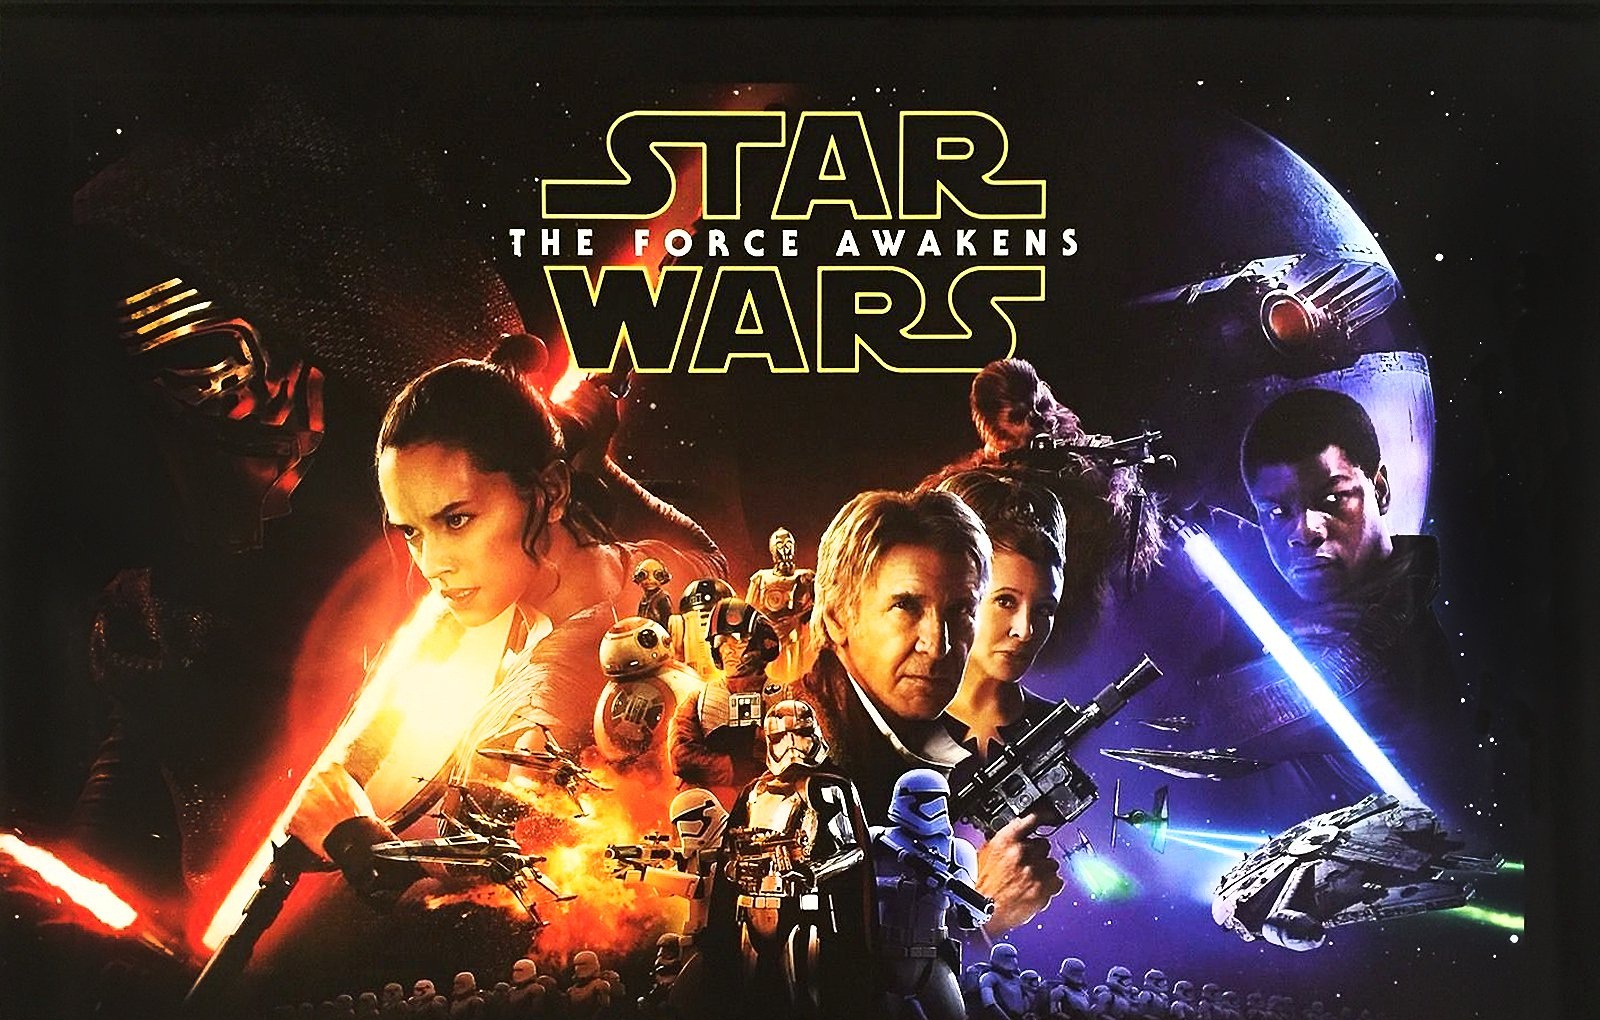 star wars the force awakens wallpaper,poster,movie,games,font,album cover